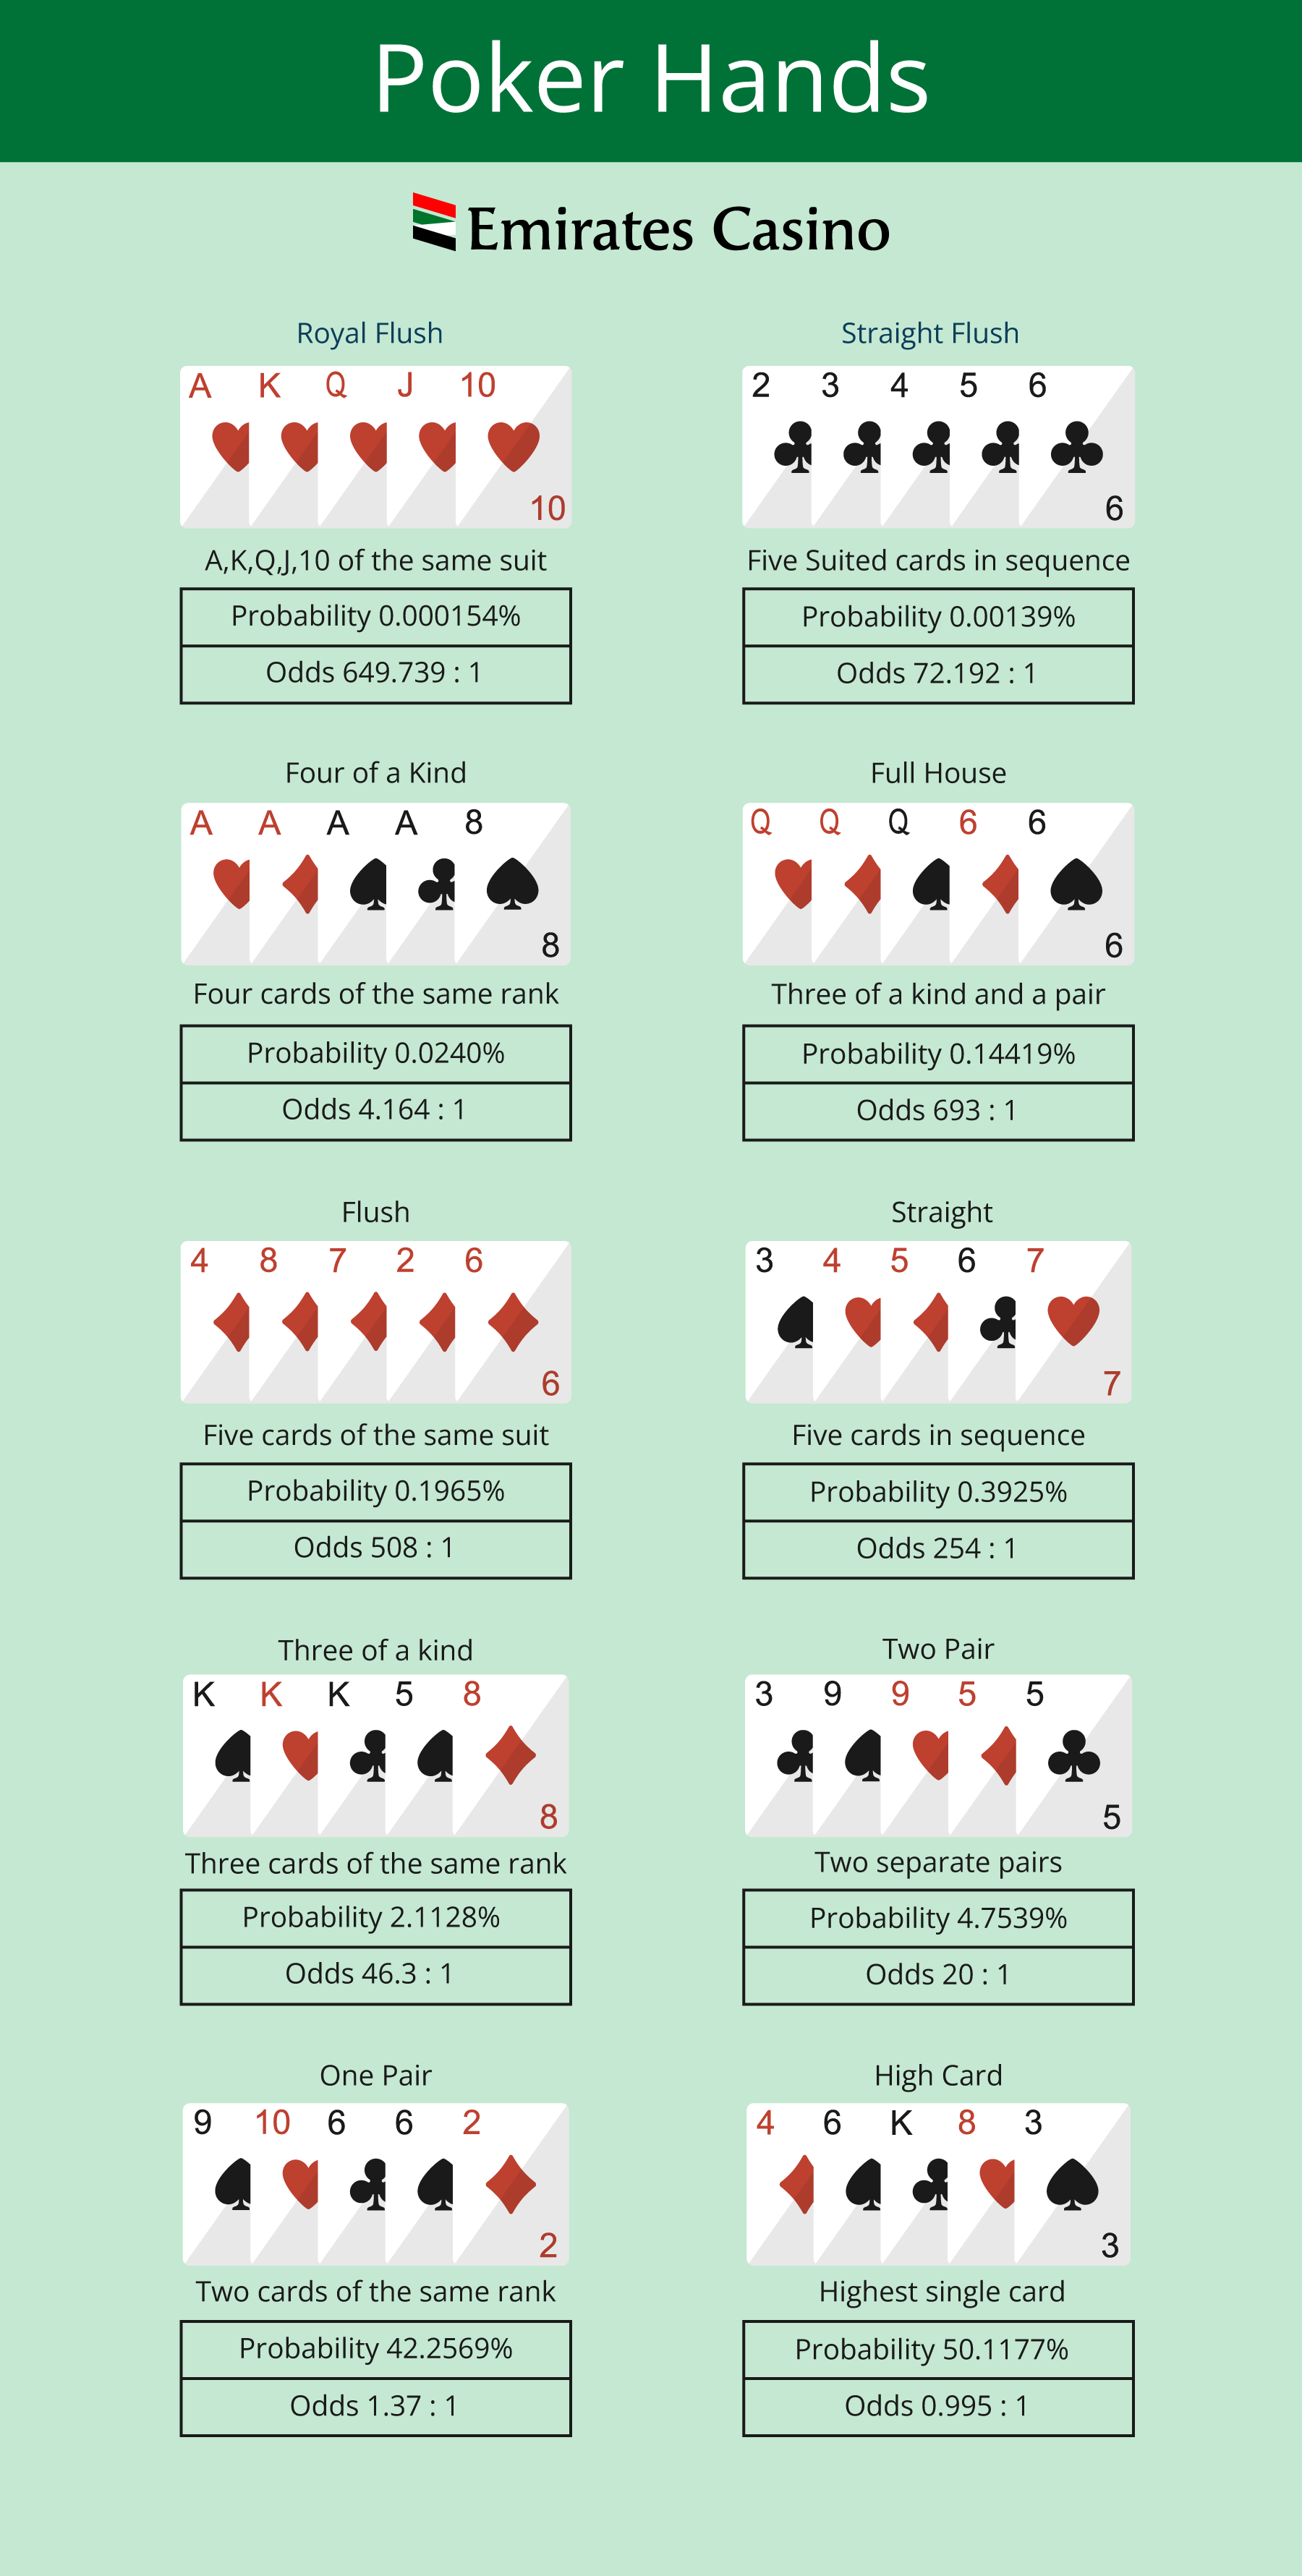 Poker hands probability infographic UAE  - Emirates Casino Poker Guide - - Emirates Casino Poker Guide - UAE Casino - Poker Variants UAE - UAE Poker Casino 